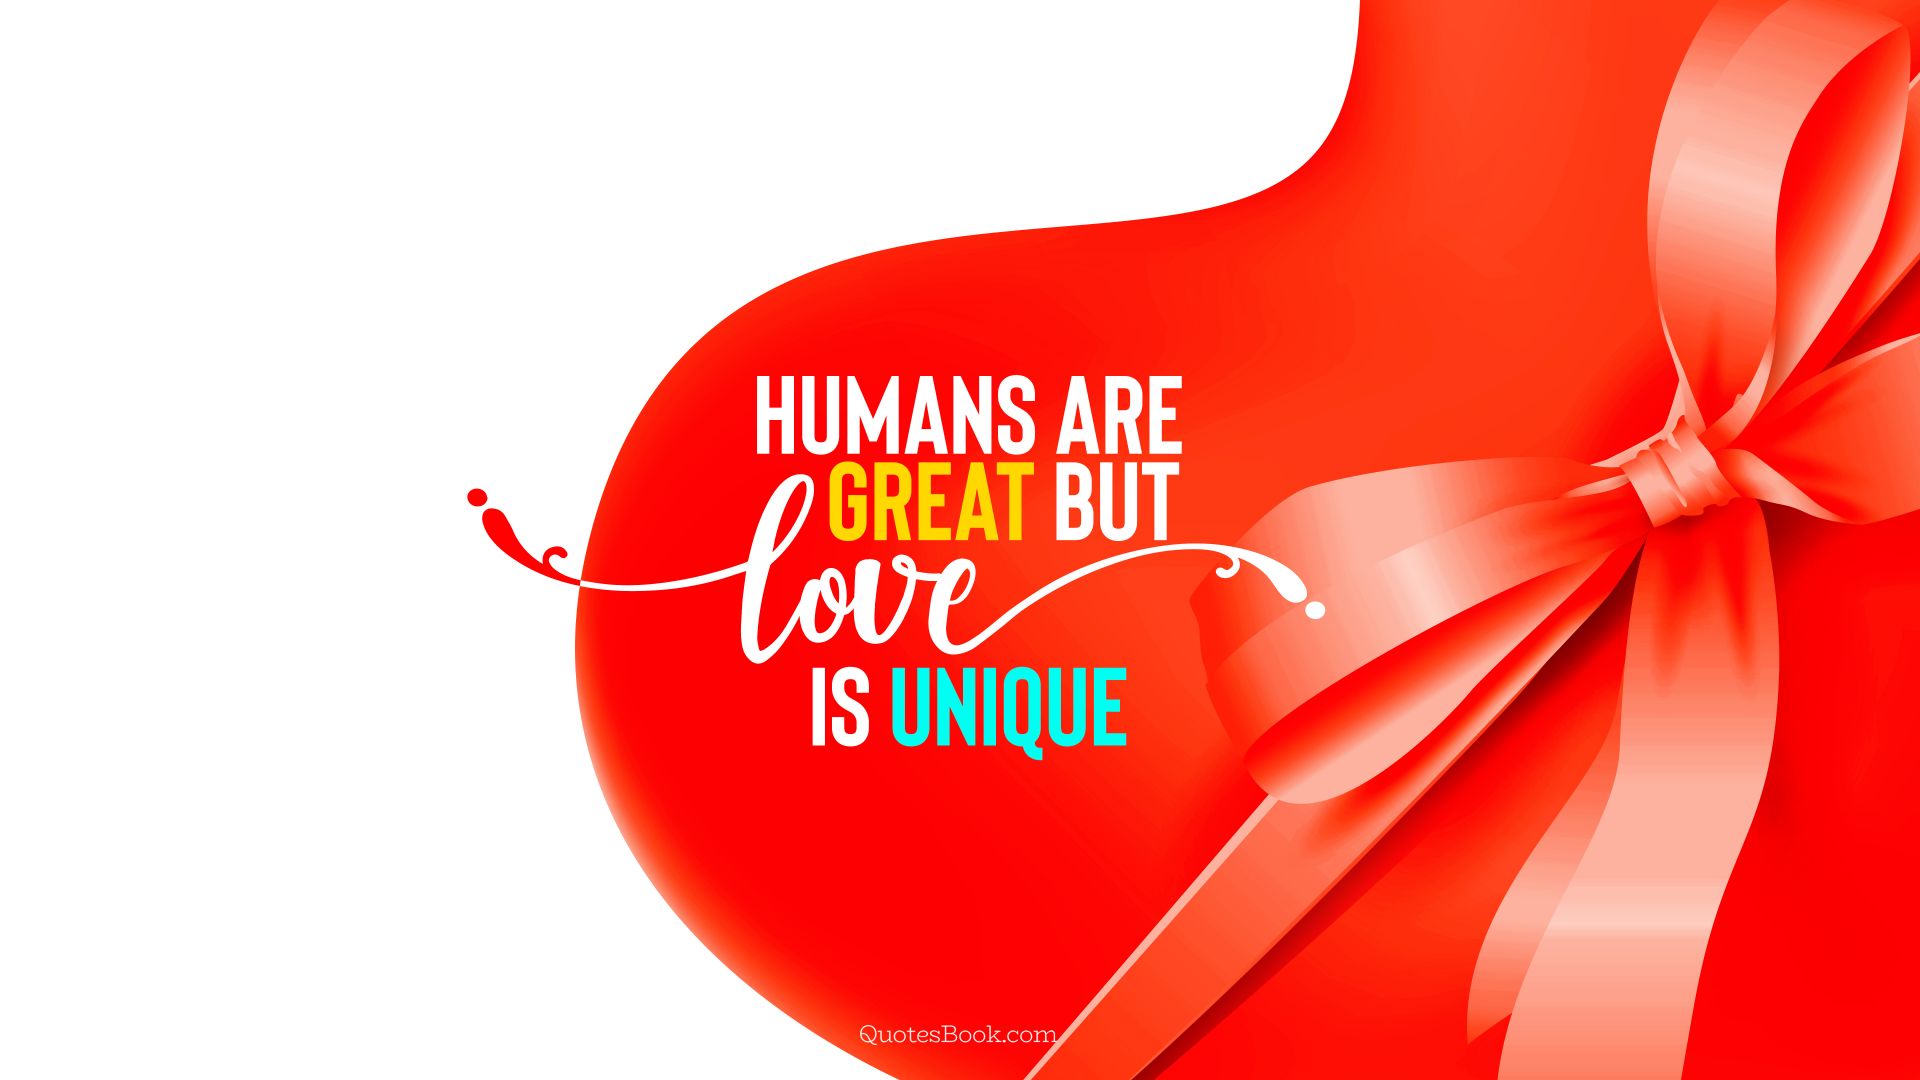 Humans are great but love is unique